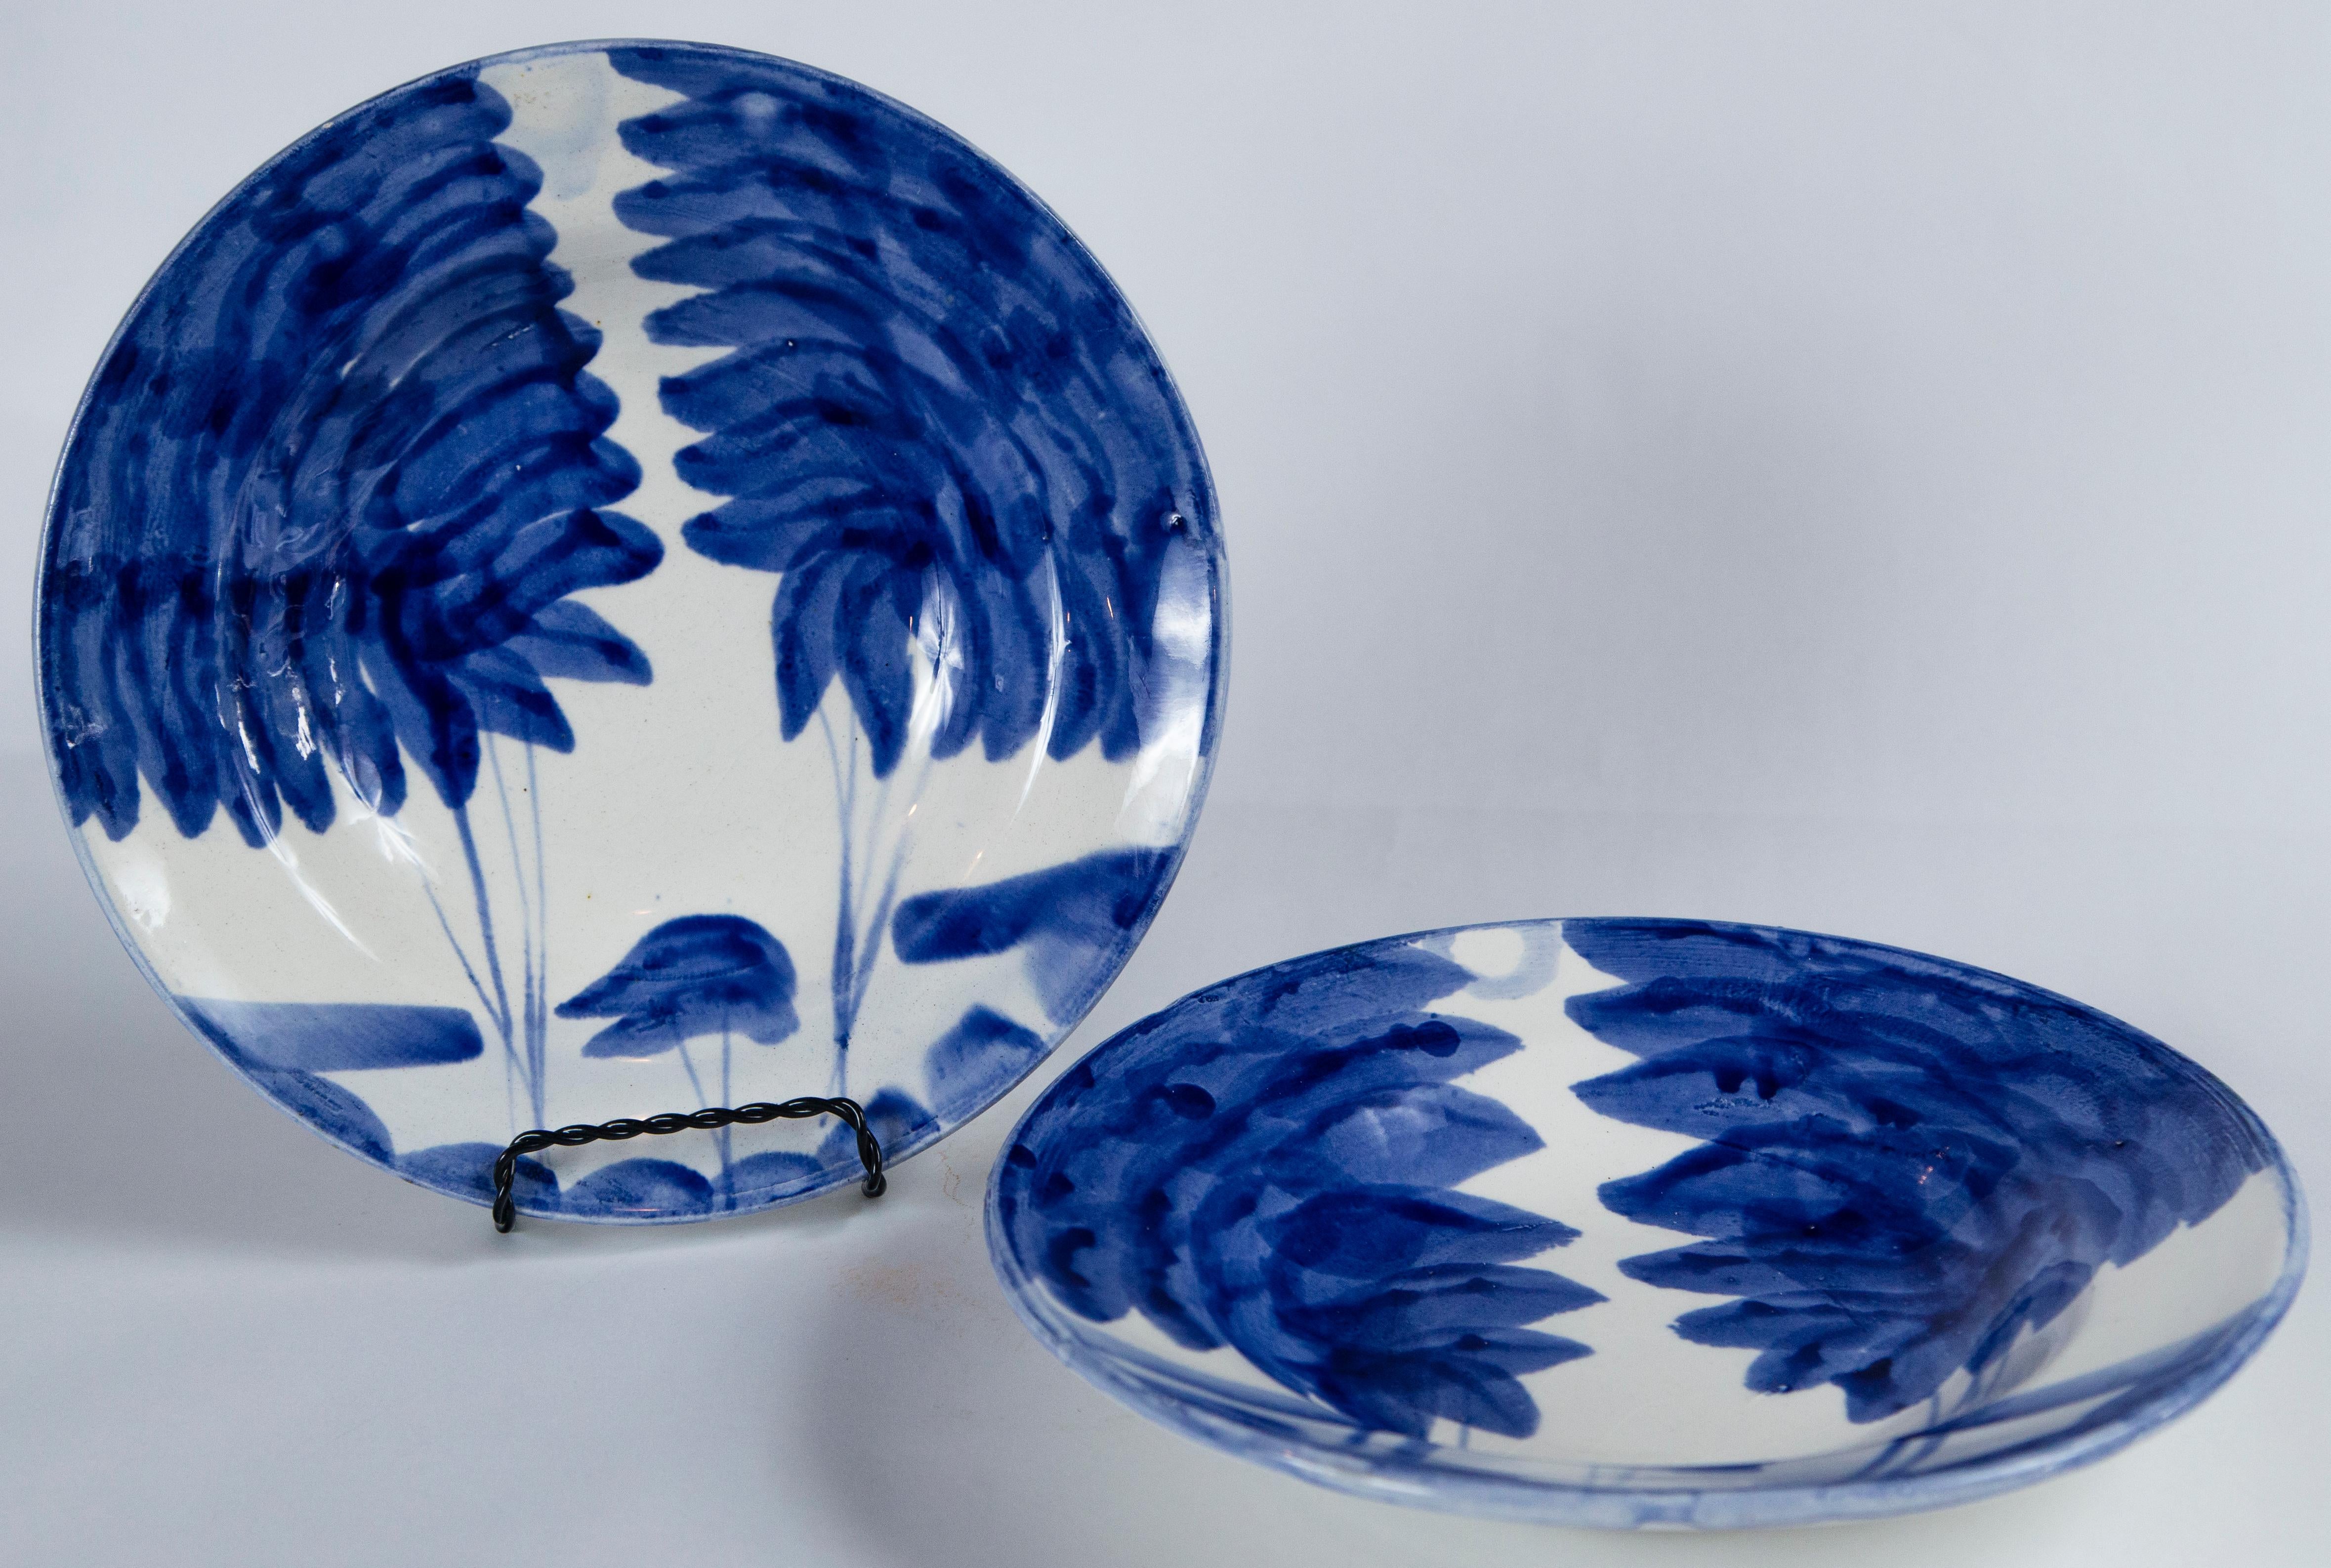 Pair of Hand Painted Blue and White Ceramic Bowls, Europe, Mid-20th Century 1